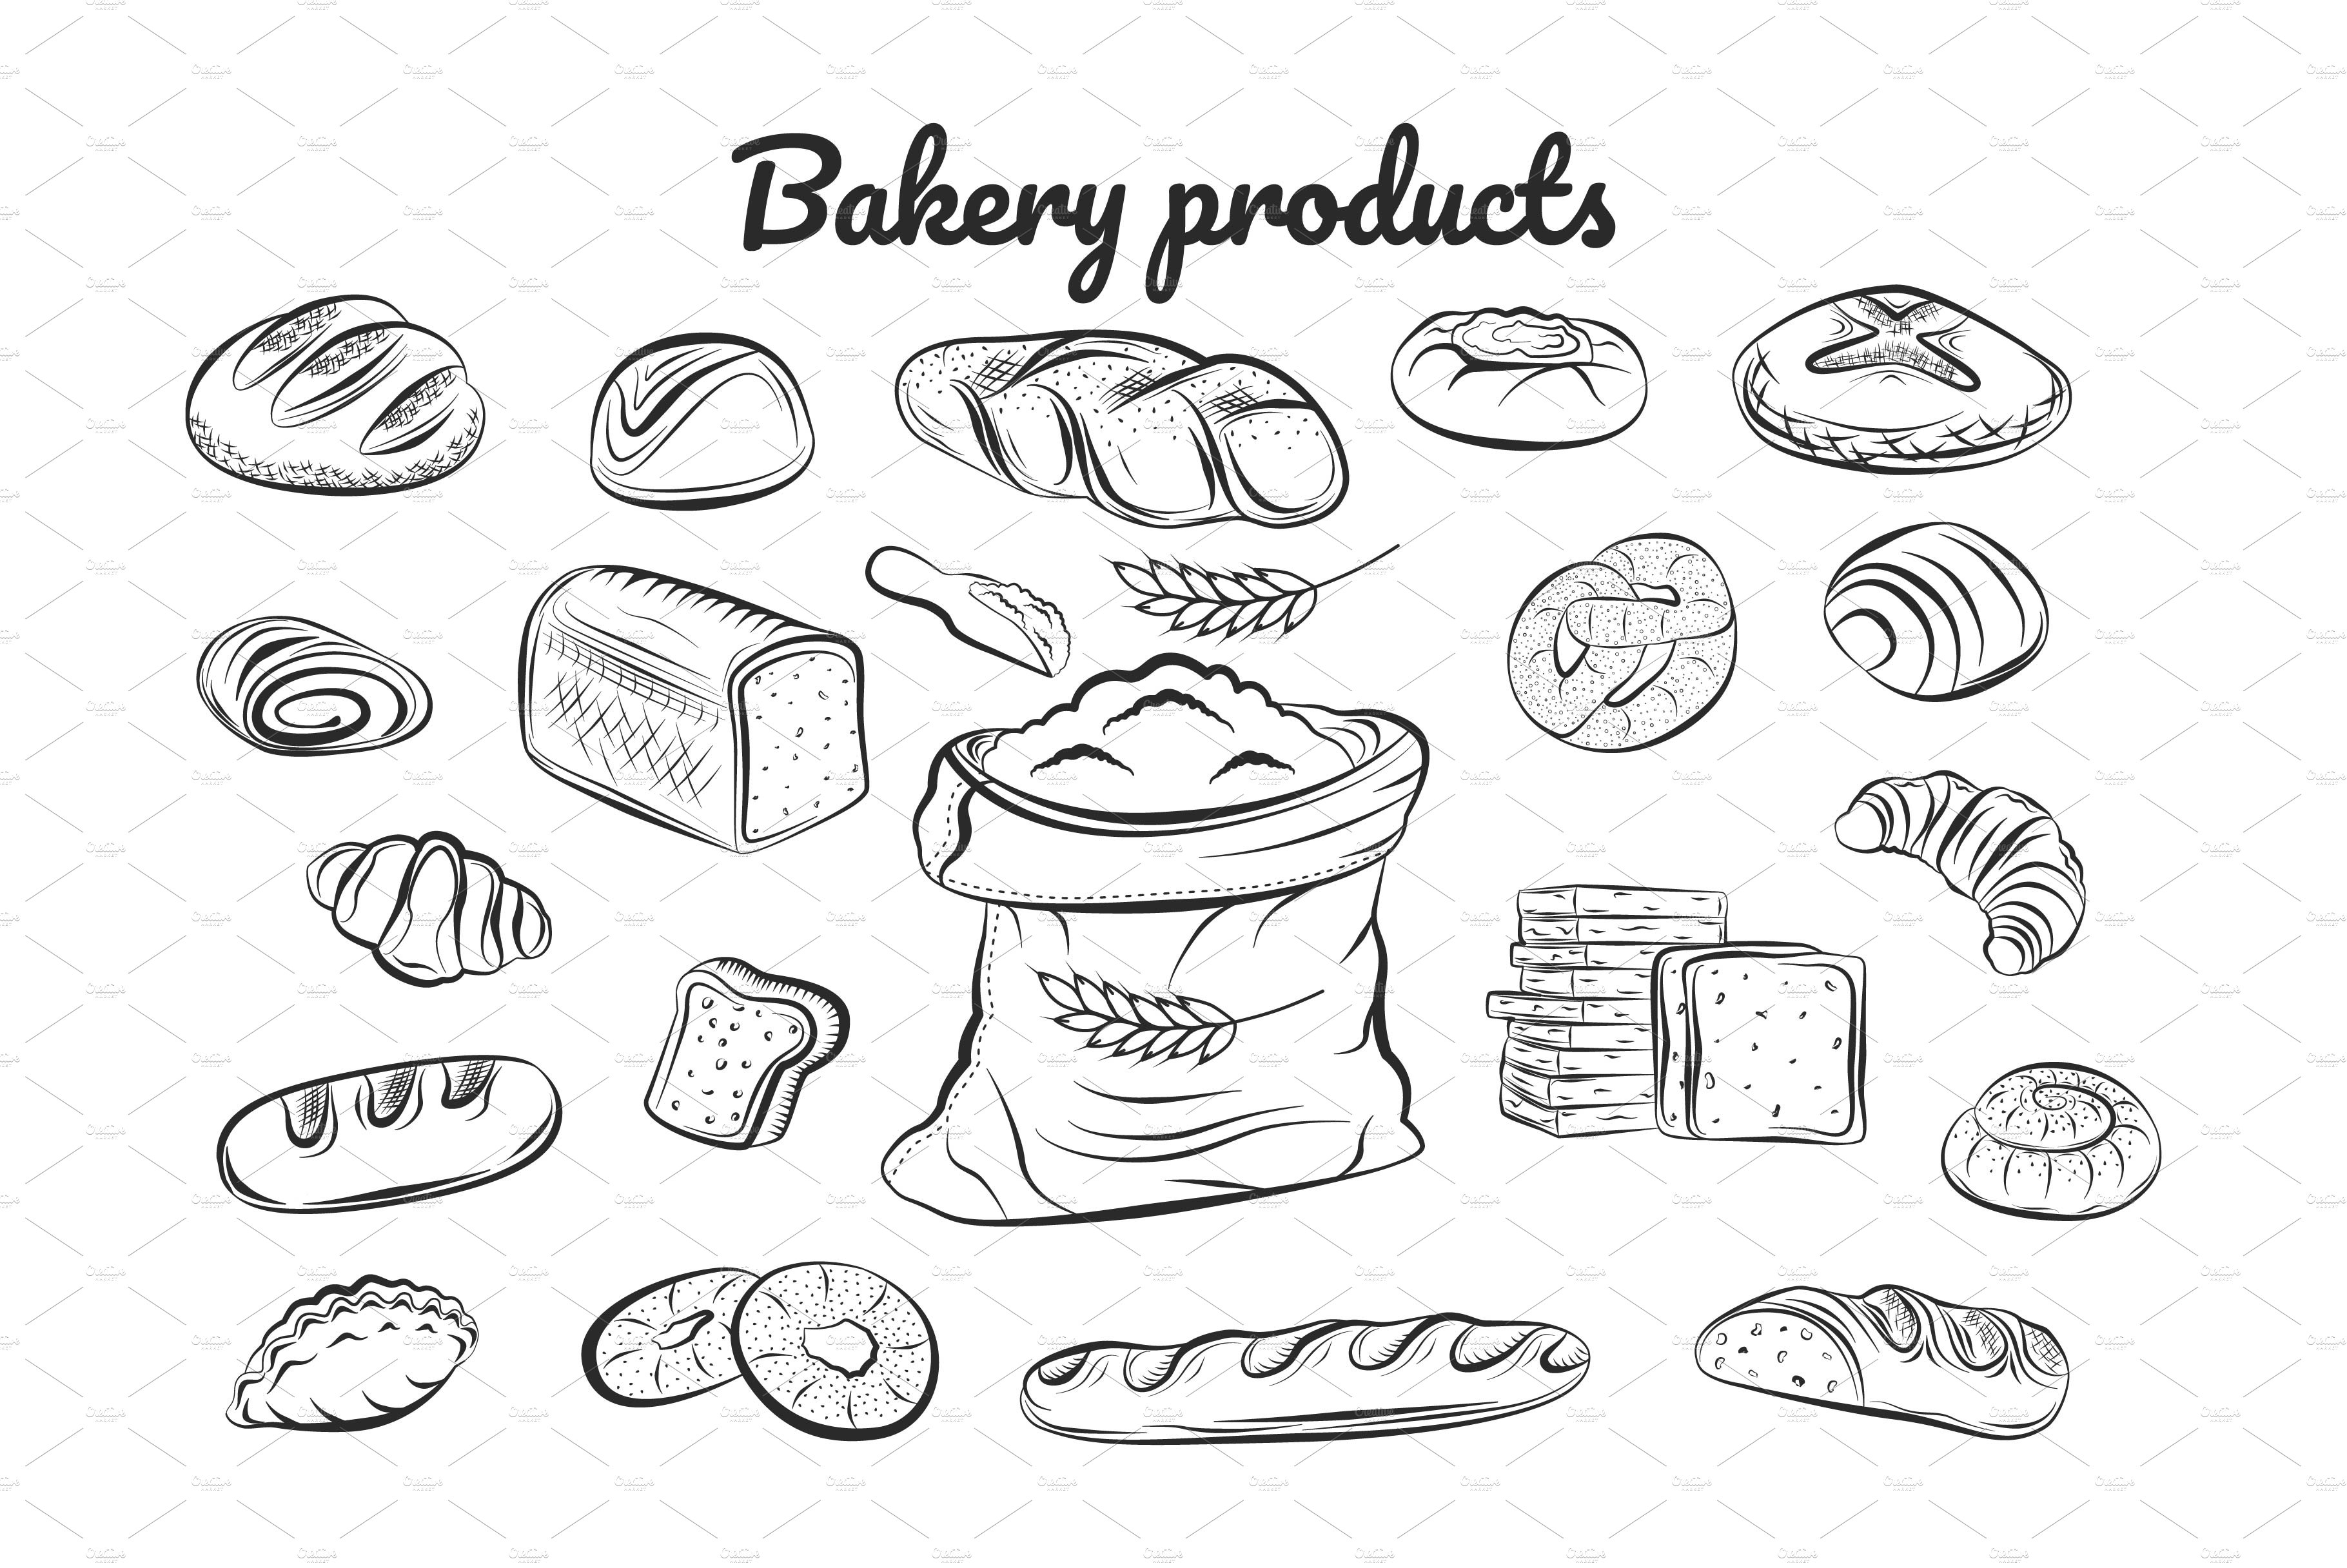 Bakery products cover image.